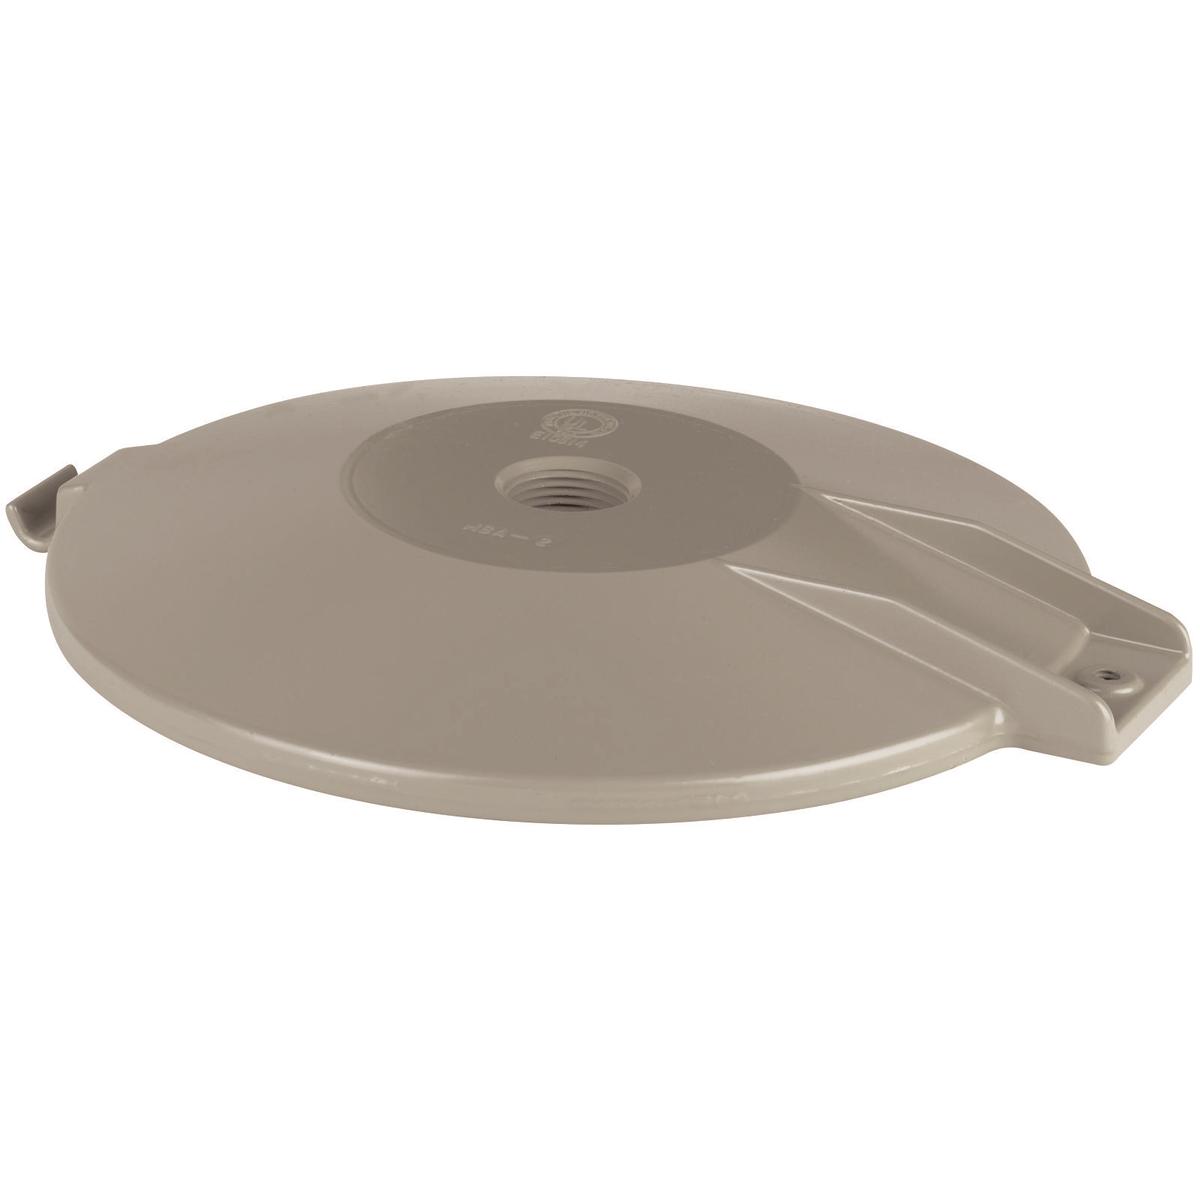 Hubbell MBA-3 MB Series - Aluminum Pendant Mounting Bracket - Hub Size 1 Inch  ; The MB Series is a compact low bay light fixture using compact fluorescent and HID lamps. The design of the MB Series makes it suitable for harsh and hazardous environments using a cast co